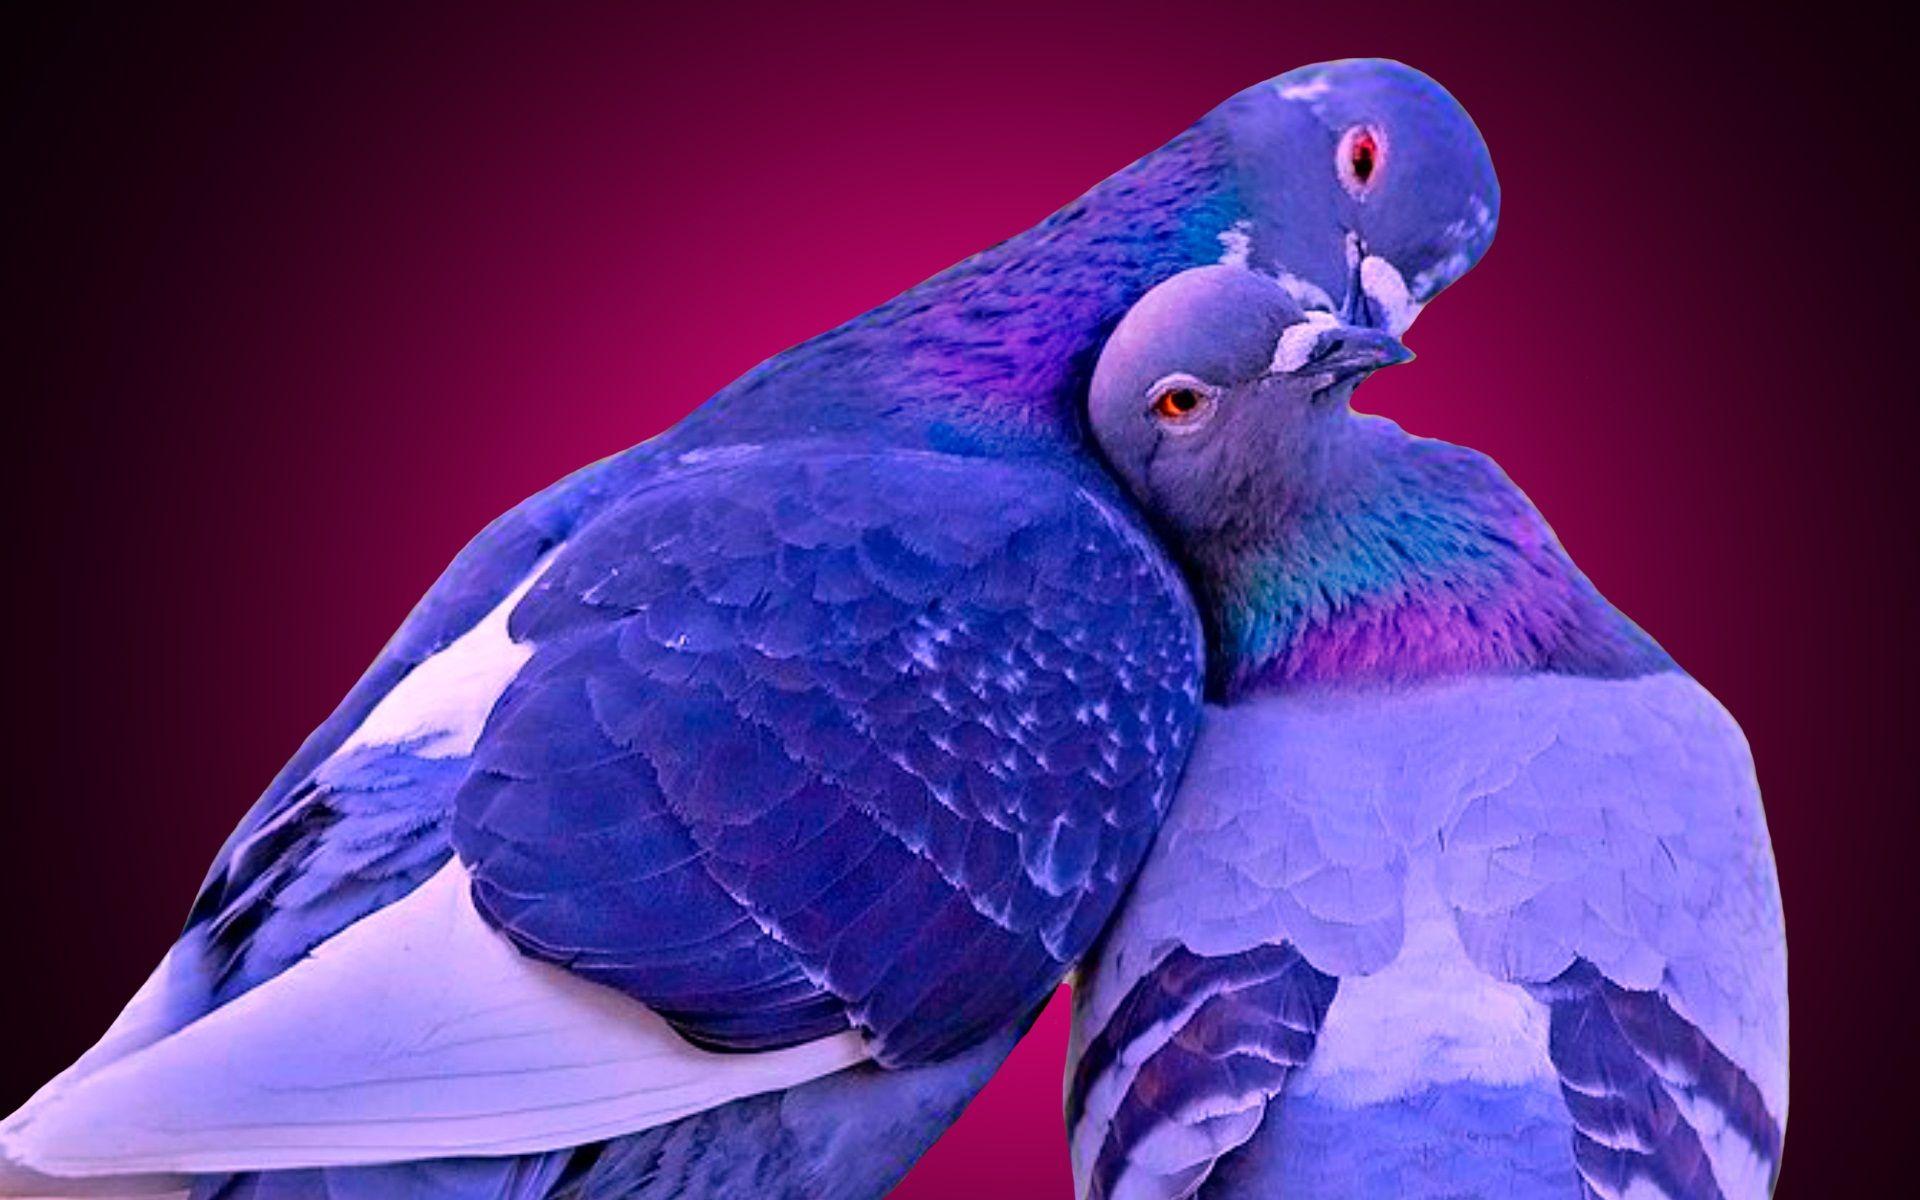 Wallpaper and Picture Graphics: Love Birds, by Jeni Caddy for PC